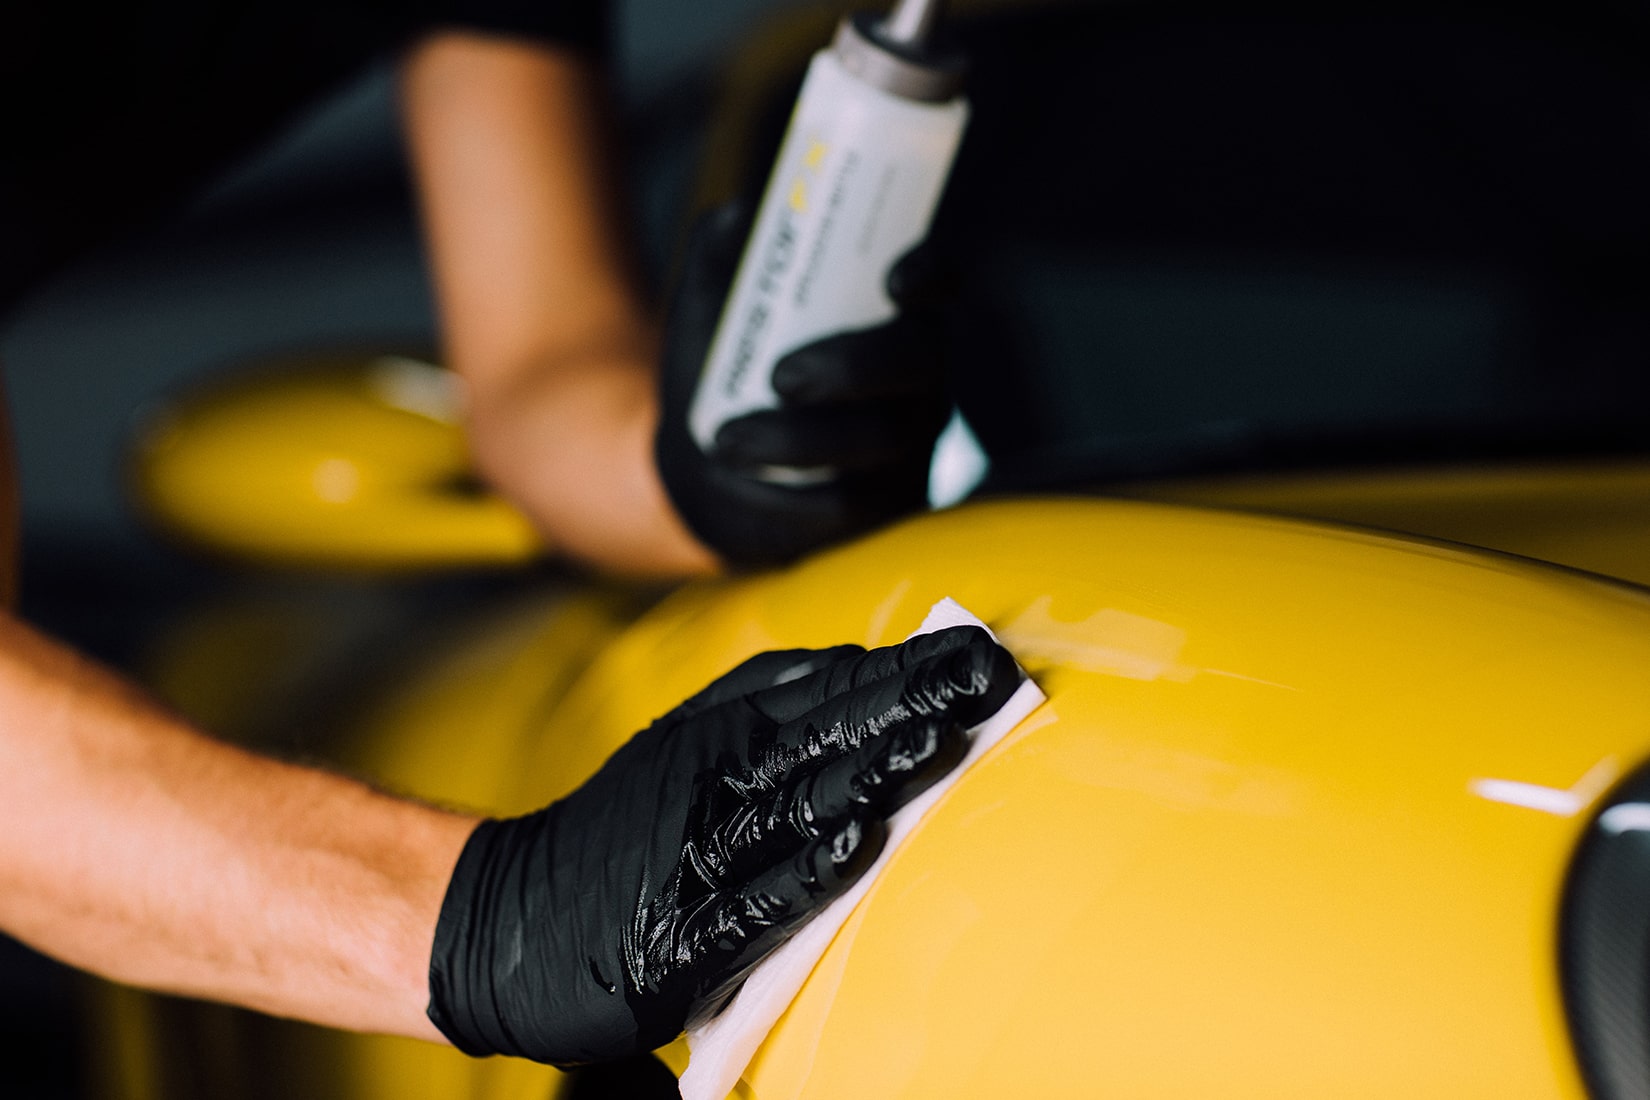 A RestorFX technician performing a restoration treatment on the painted surface of a properly-prepared yellow sports car